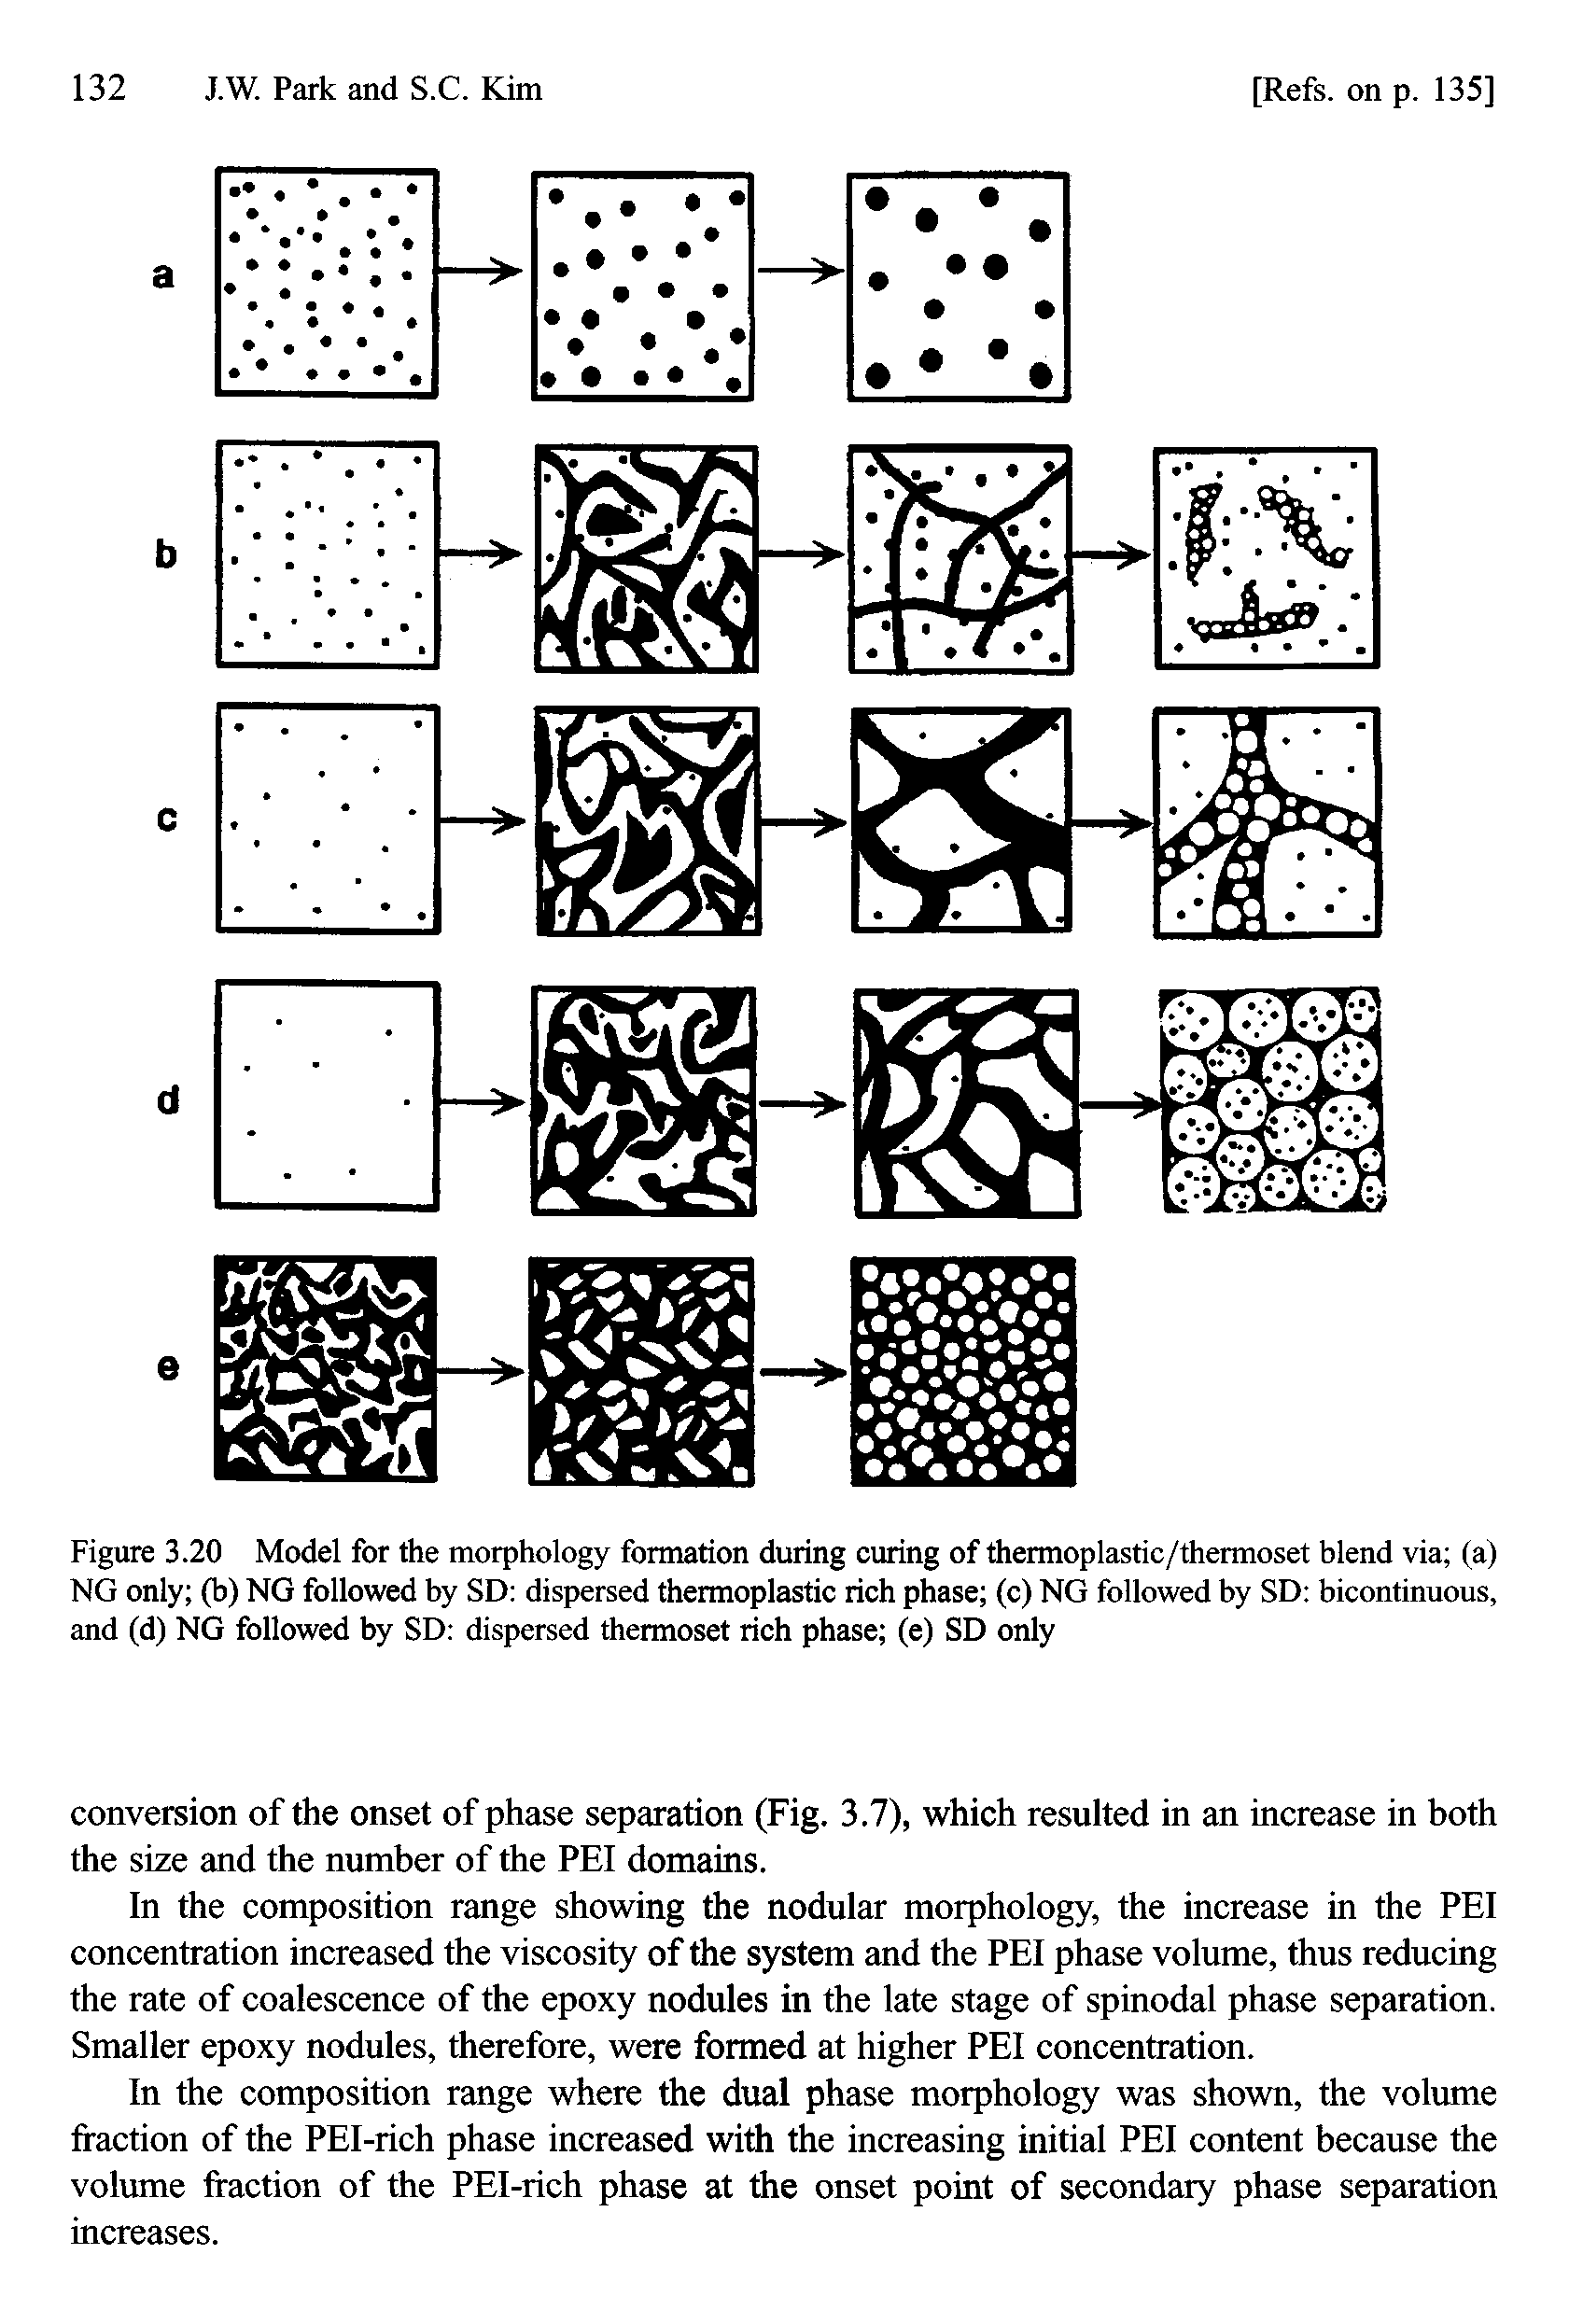 Figure 3.20 Model for the morphology formation during curing of thermoplastic/thermoset blend via (a) NG only (b) NG followed by SD dispersed thermoplastic rich phase (c) NG followed by SD bicontinuous, and (d) NG followed by SD dispersed thermoset rich phase (e) SD only...